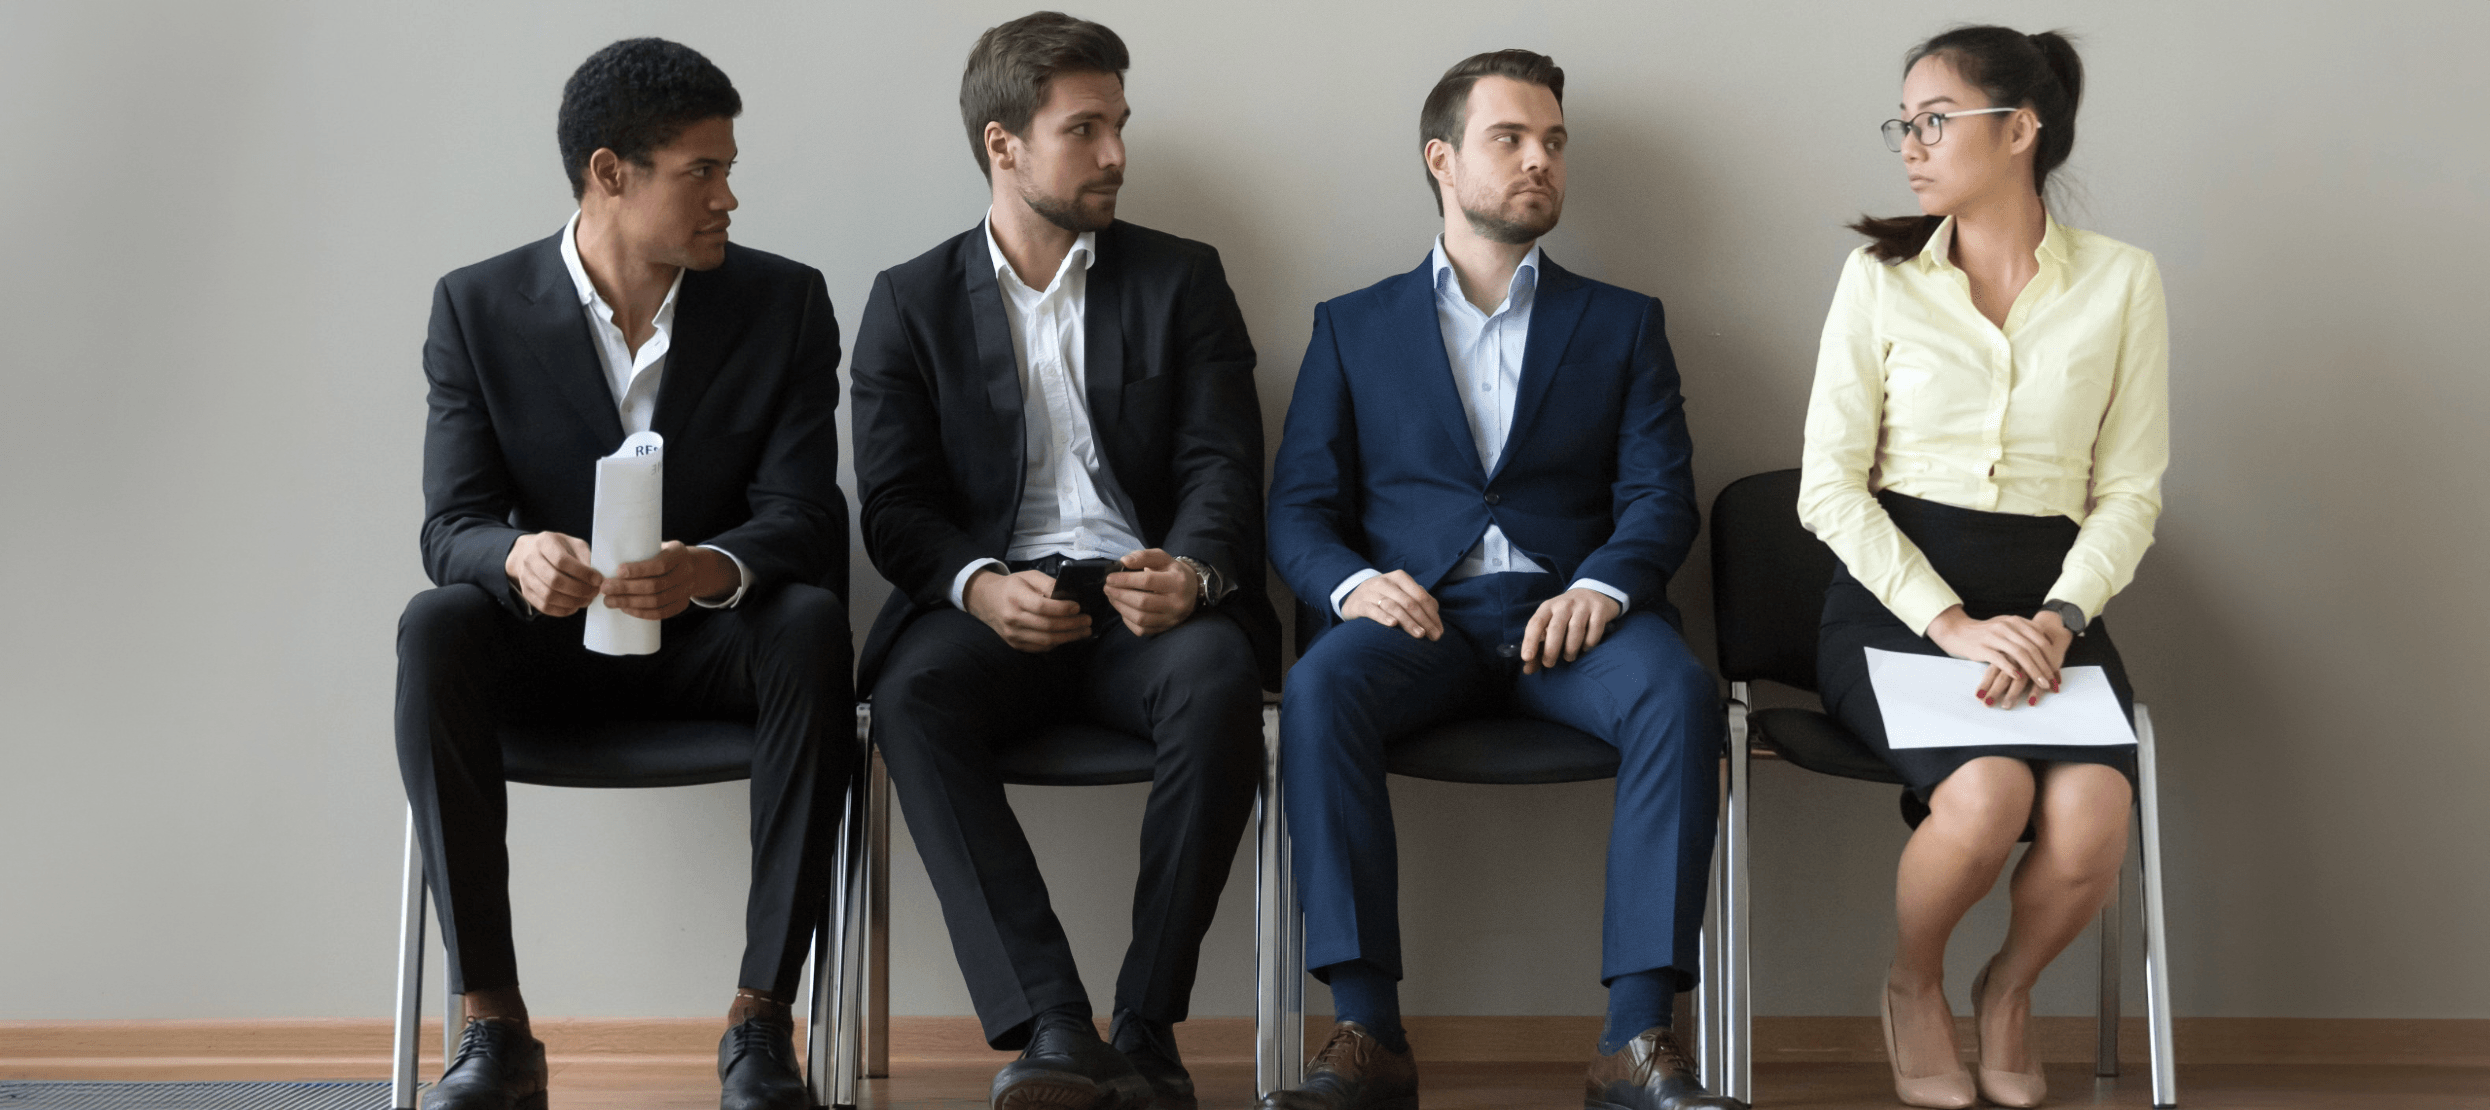 How to Minimize Unconscious Bias in Hiring